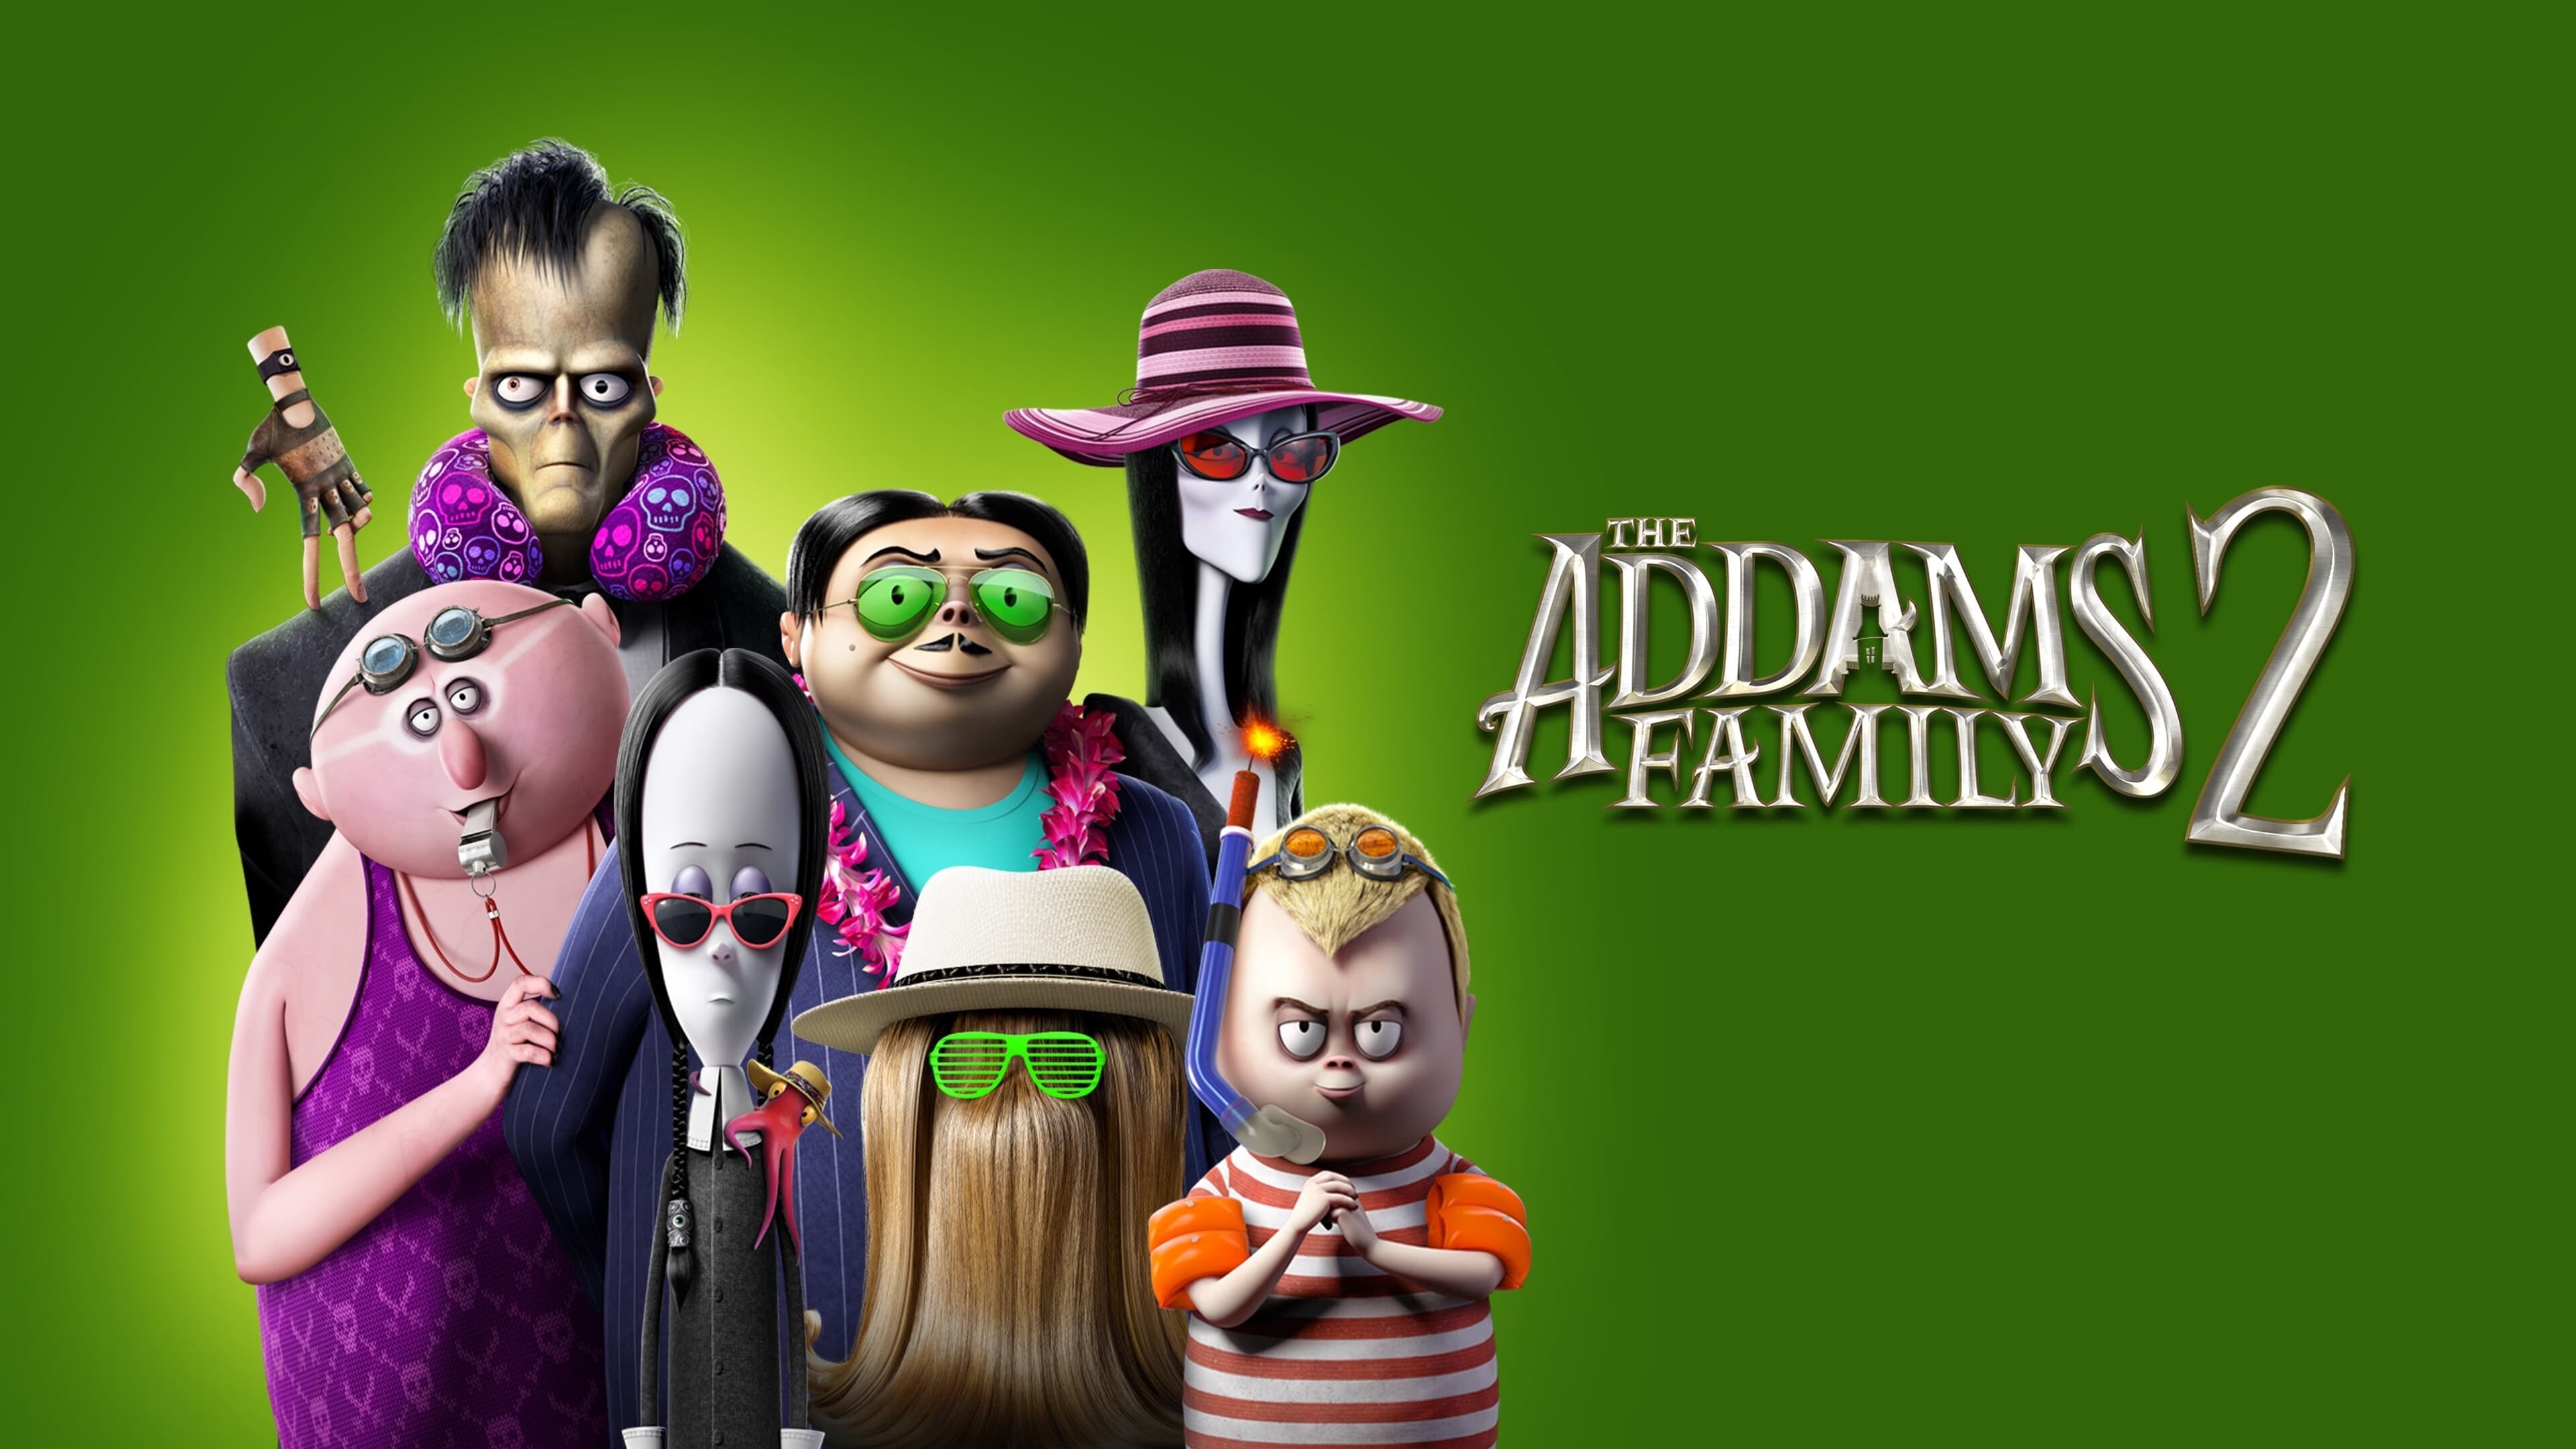 The Addams Family 2: A 2021 computer-animated supernatural black comedy road film directed by Greg Tiernan. 3840x2160 4K Background.